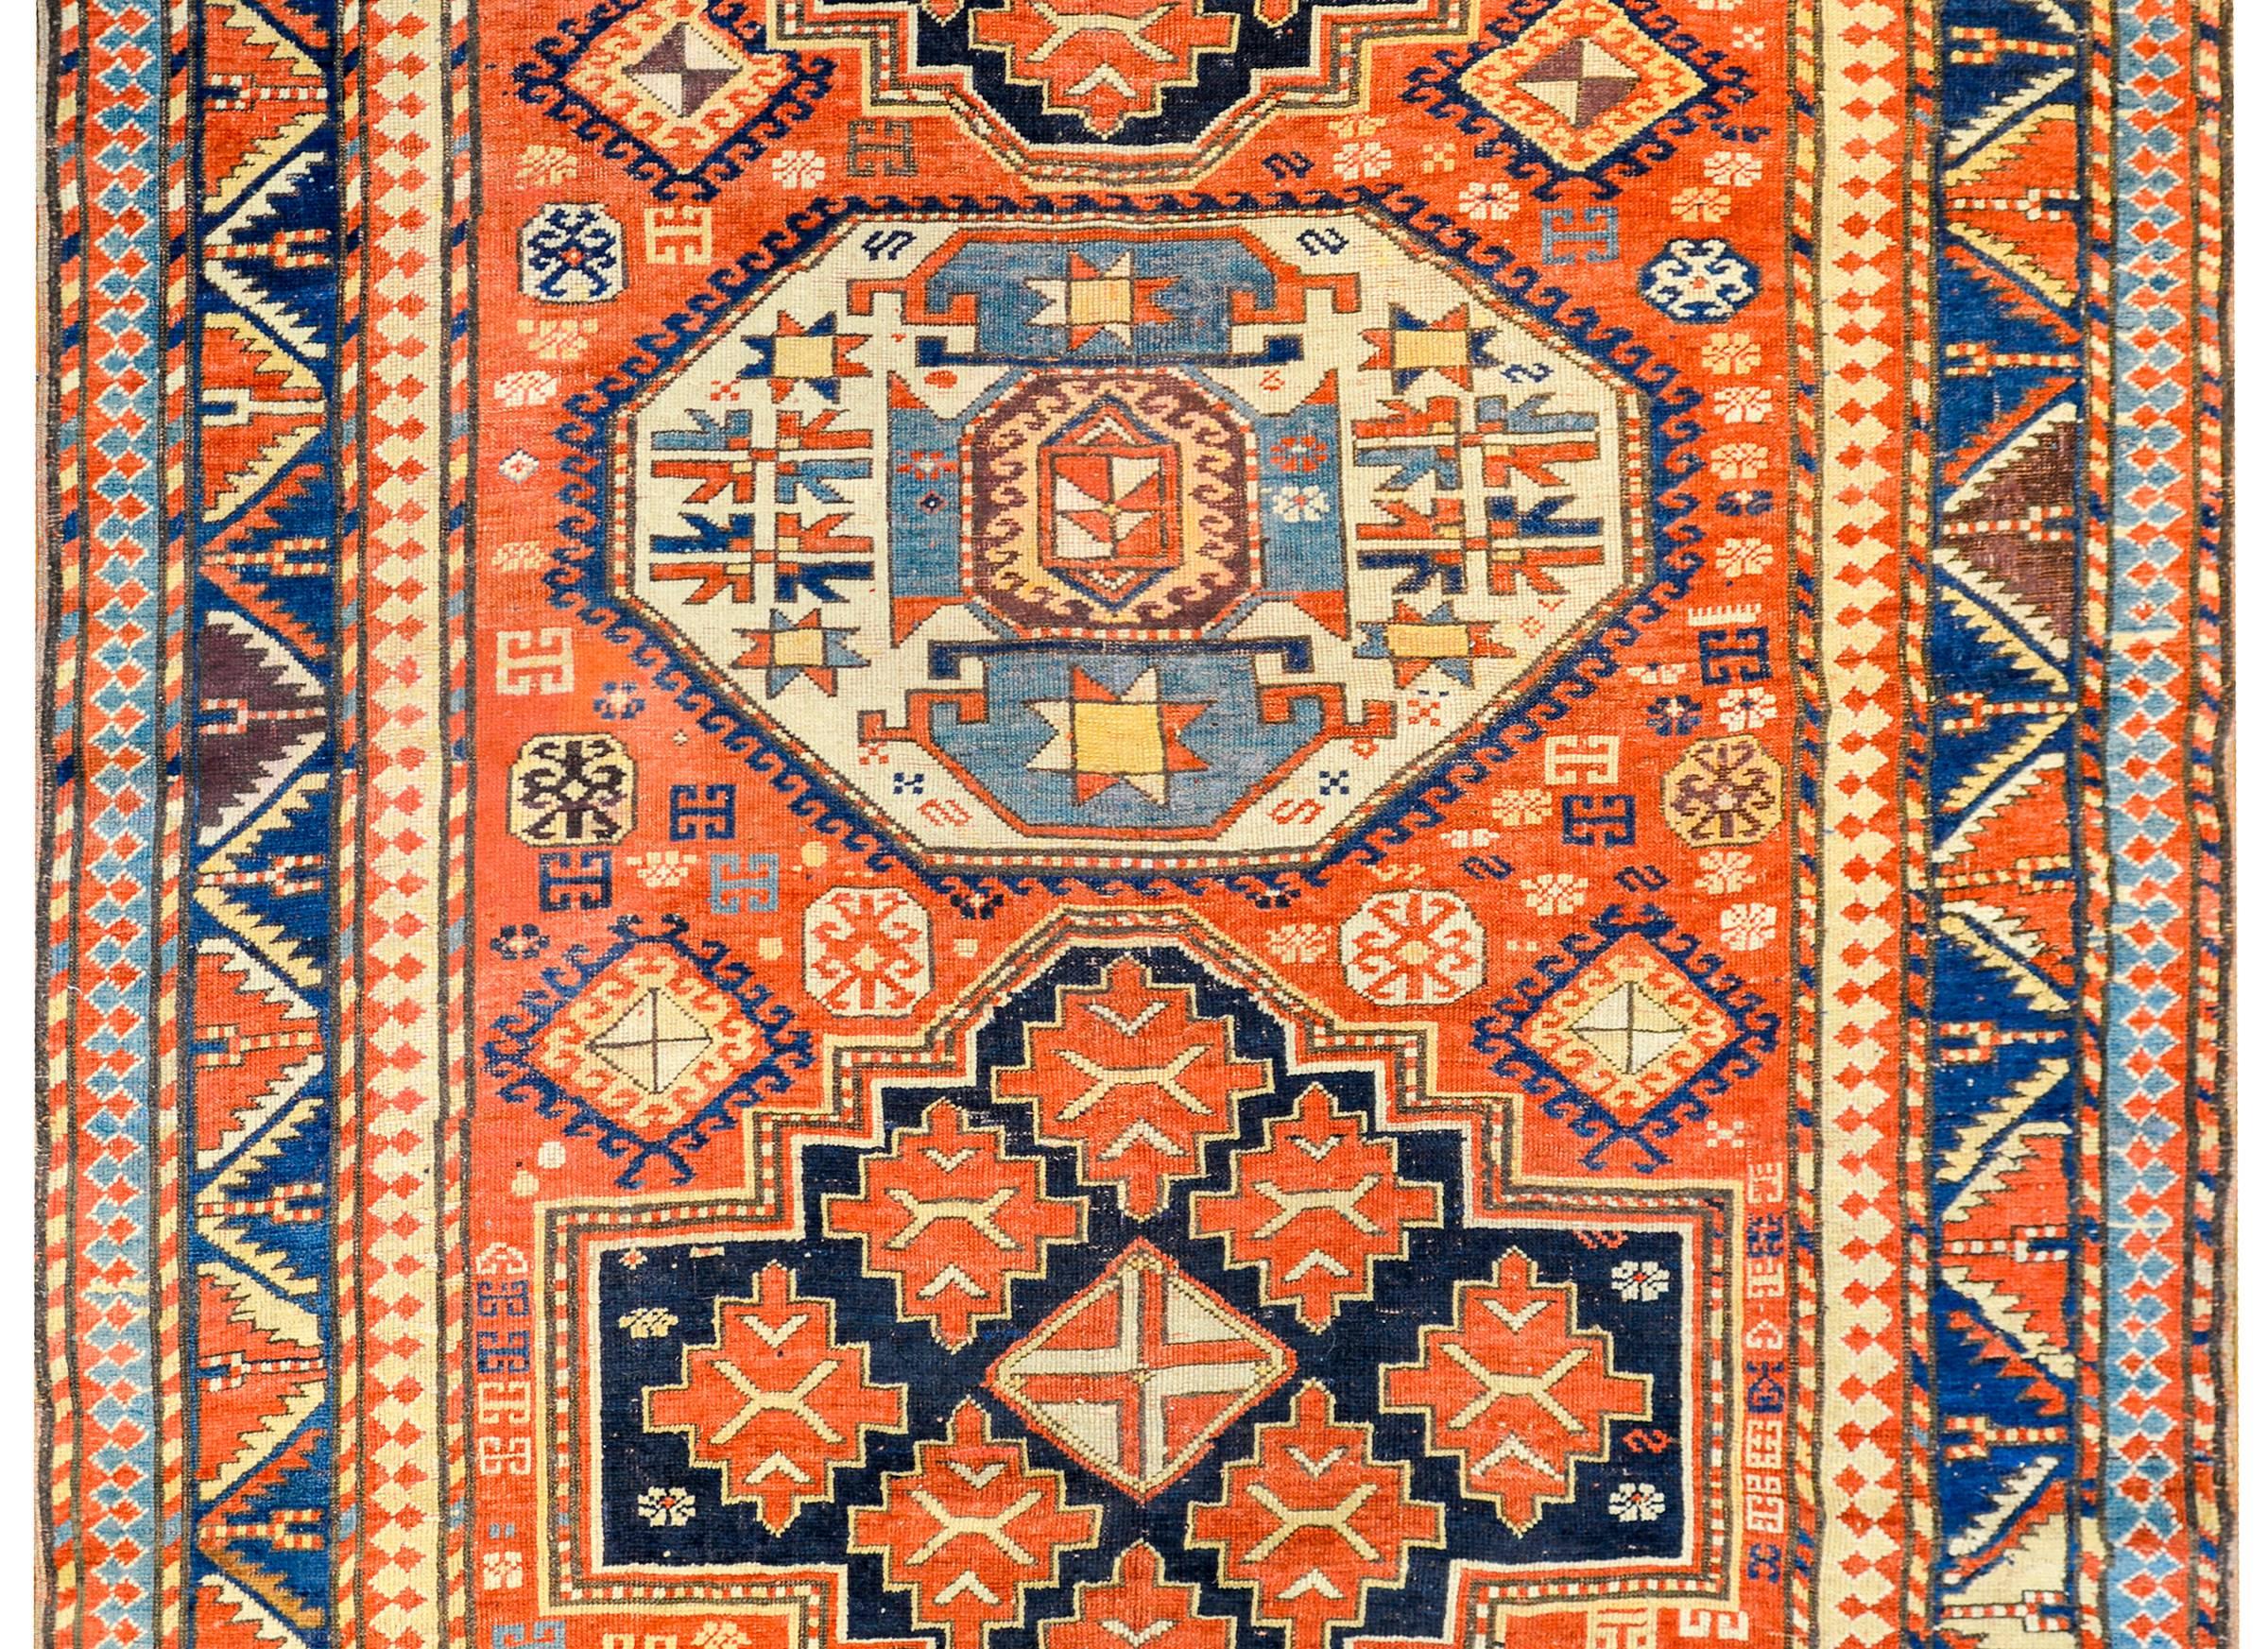 An extraordinary late 19th century Lori Pambak, South Caucasus rug with a fantastically woven pattern consisting of two large diamond shaped medallions, and one central hexagonal medallion, each woven with beautiful large-scale stylized flowers